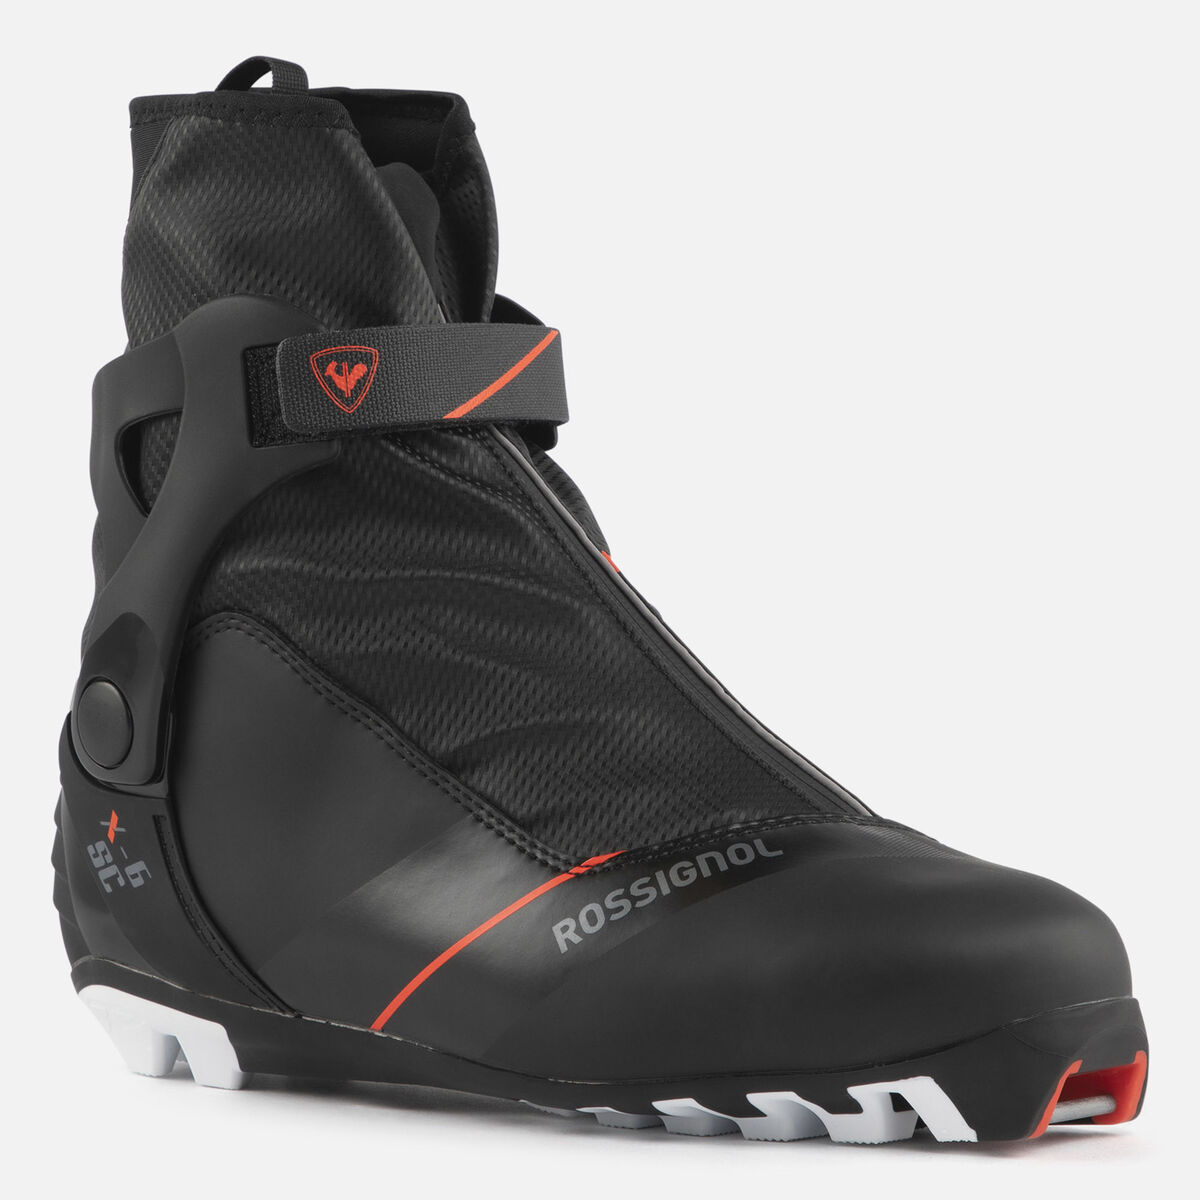 Unisex Race Skating And Classic Nordic Boots X-6 Sc